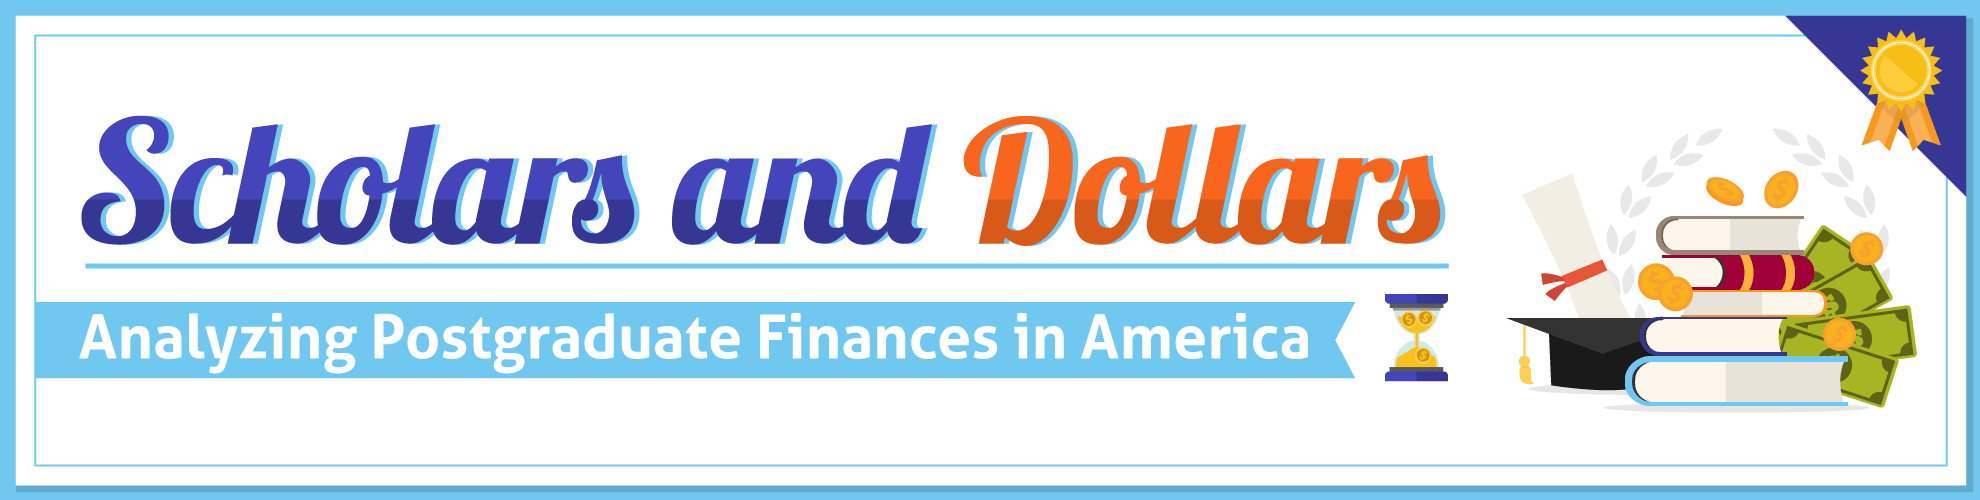 Banner for 'Scholars and Dollars: Analyzing Postgraduate Finances in America' with academic icons like books, graduation cap, trophy, and medal.